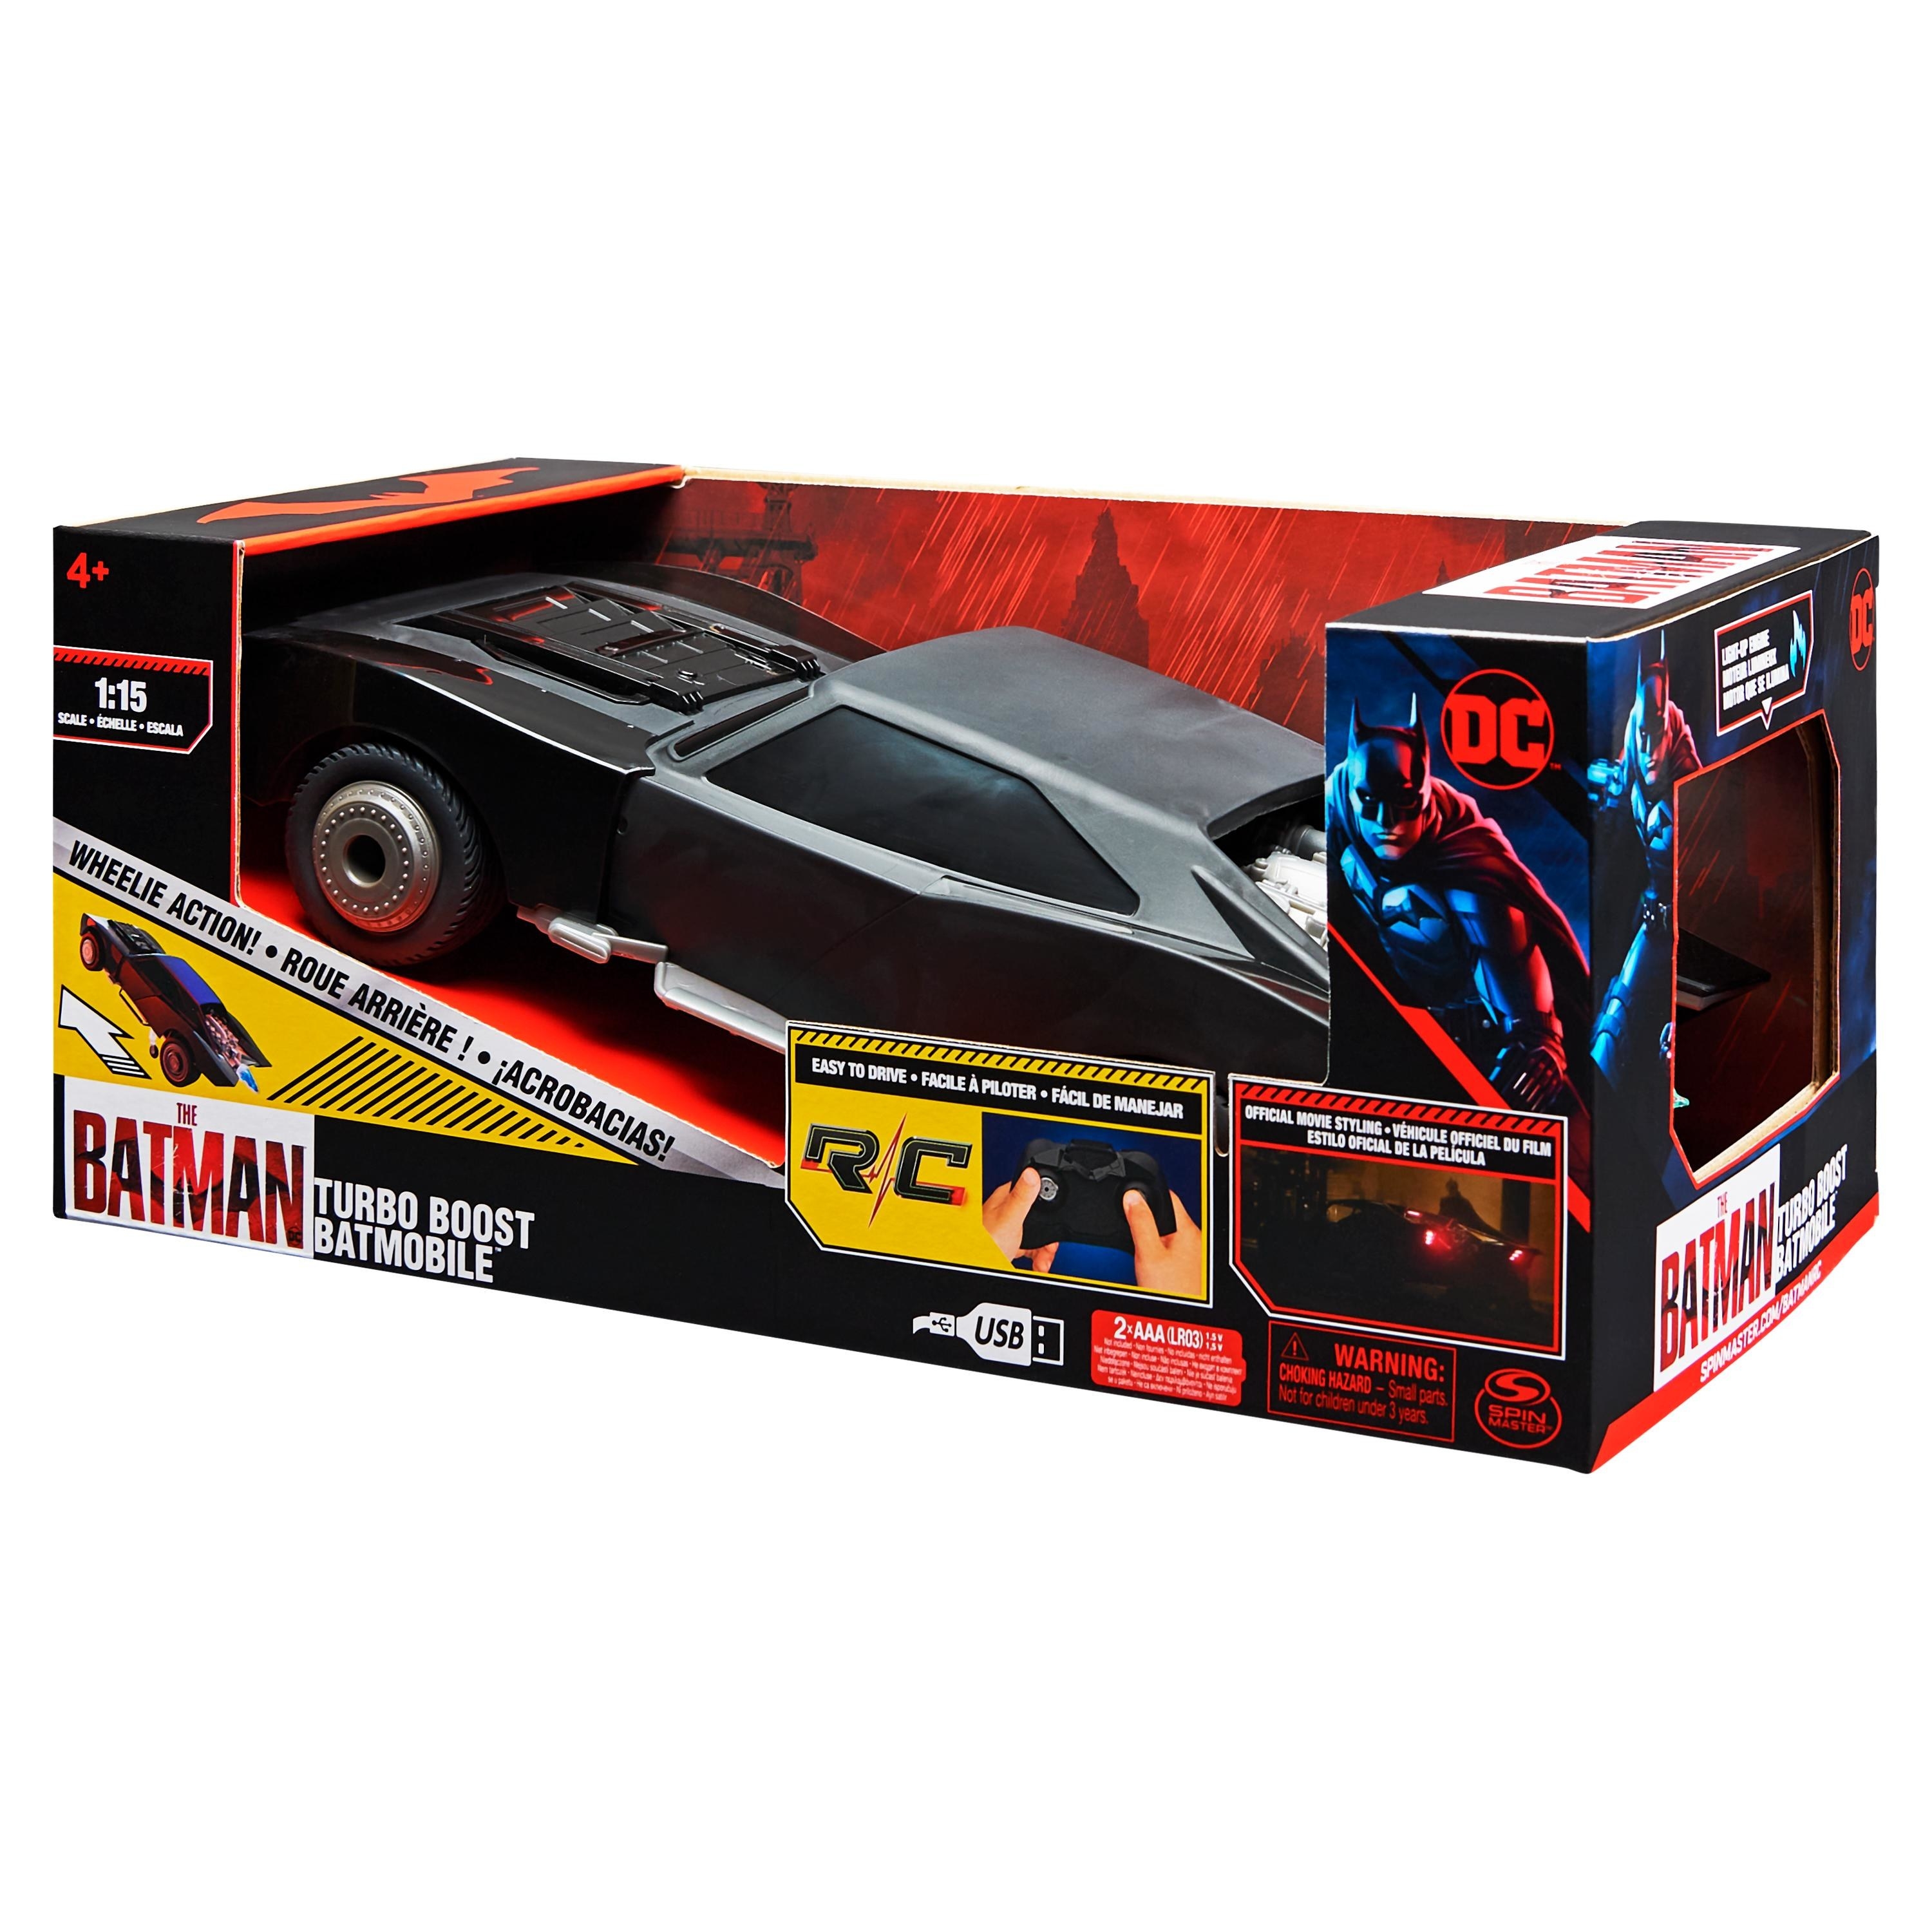 We see the Batman Turbo Boost Batmobile™ with Remote Control in the packaging.